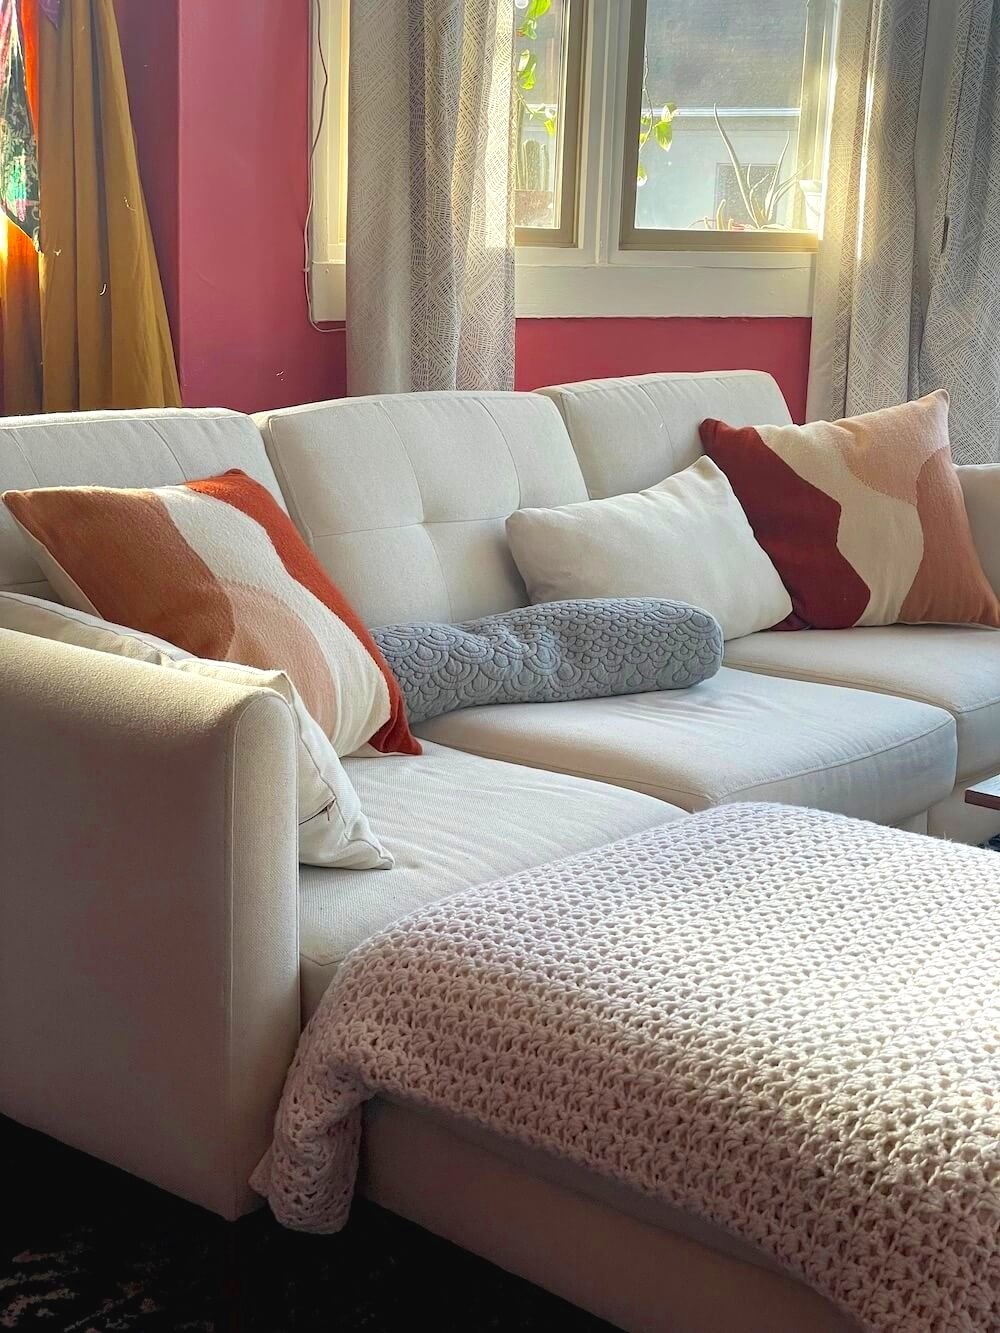 How to Keep Couch Cushions from Sliding [5 Easy Steps]